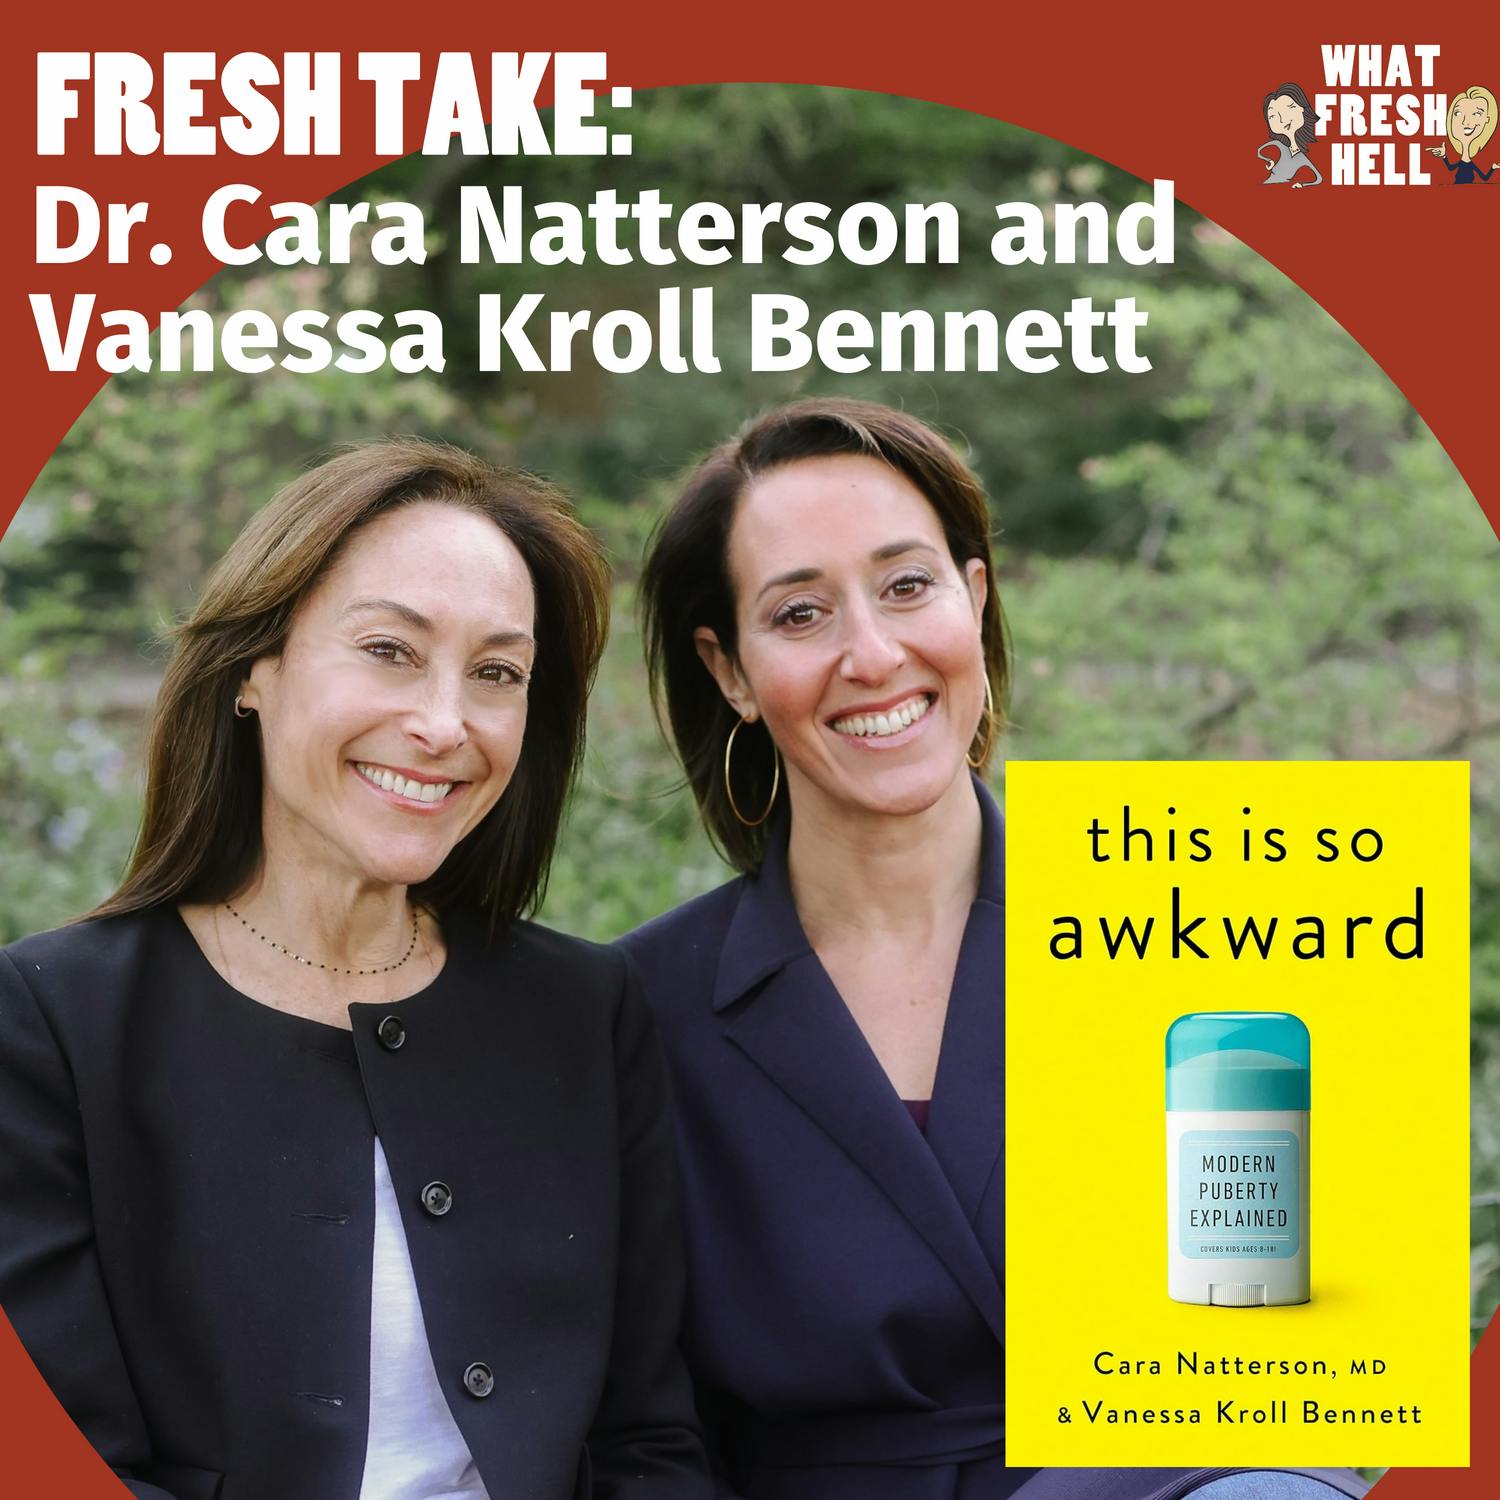 Episode image for Fresh Take: Vanessa Kroll Bennett and Dr. Cara Natterson on Puberty